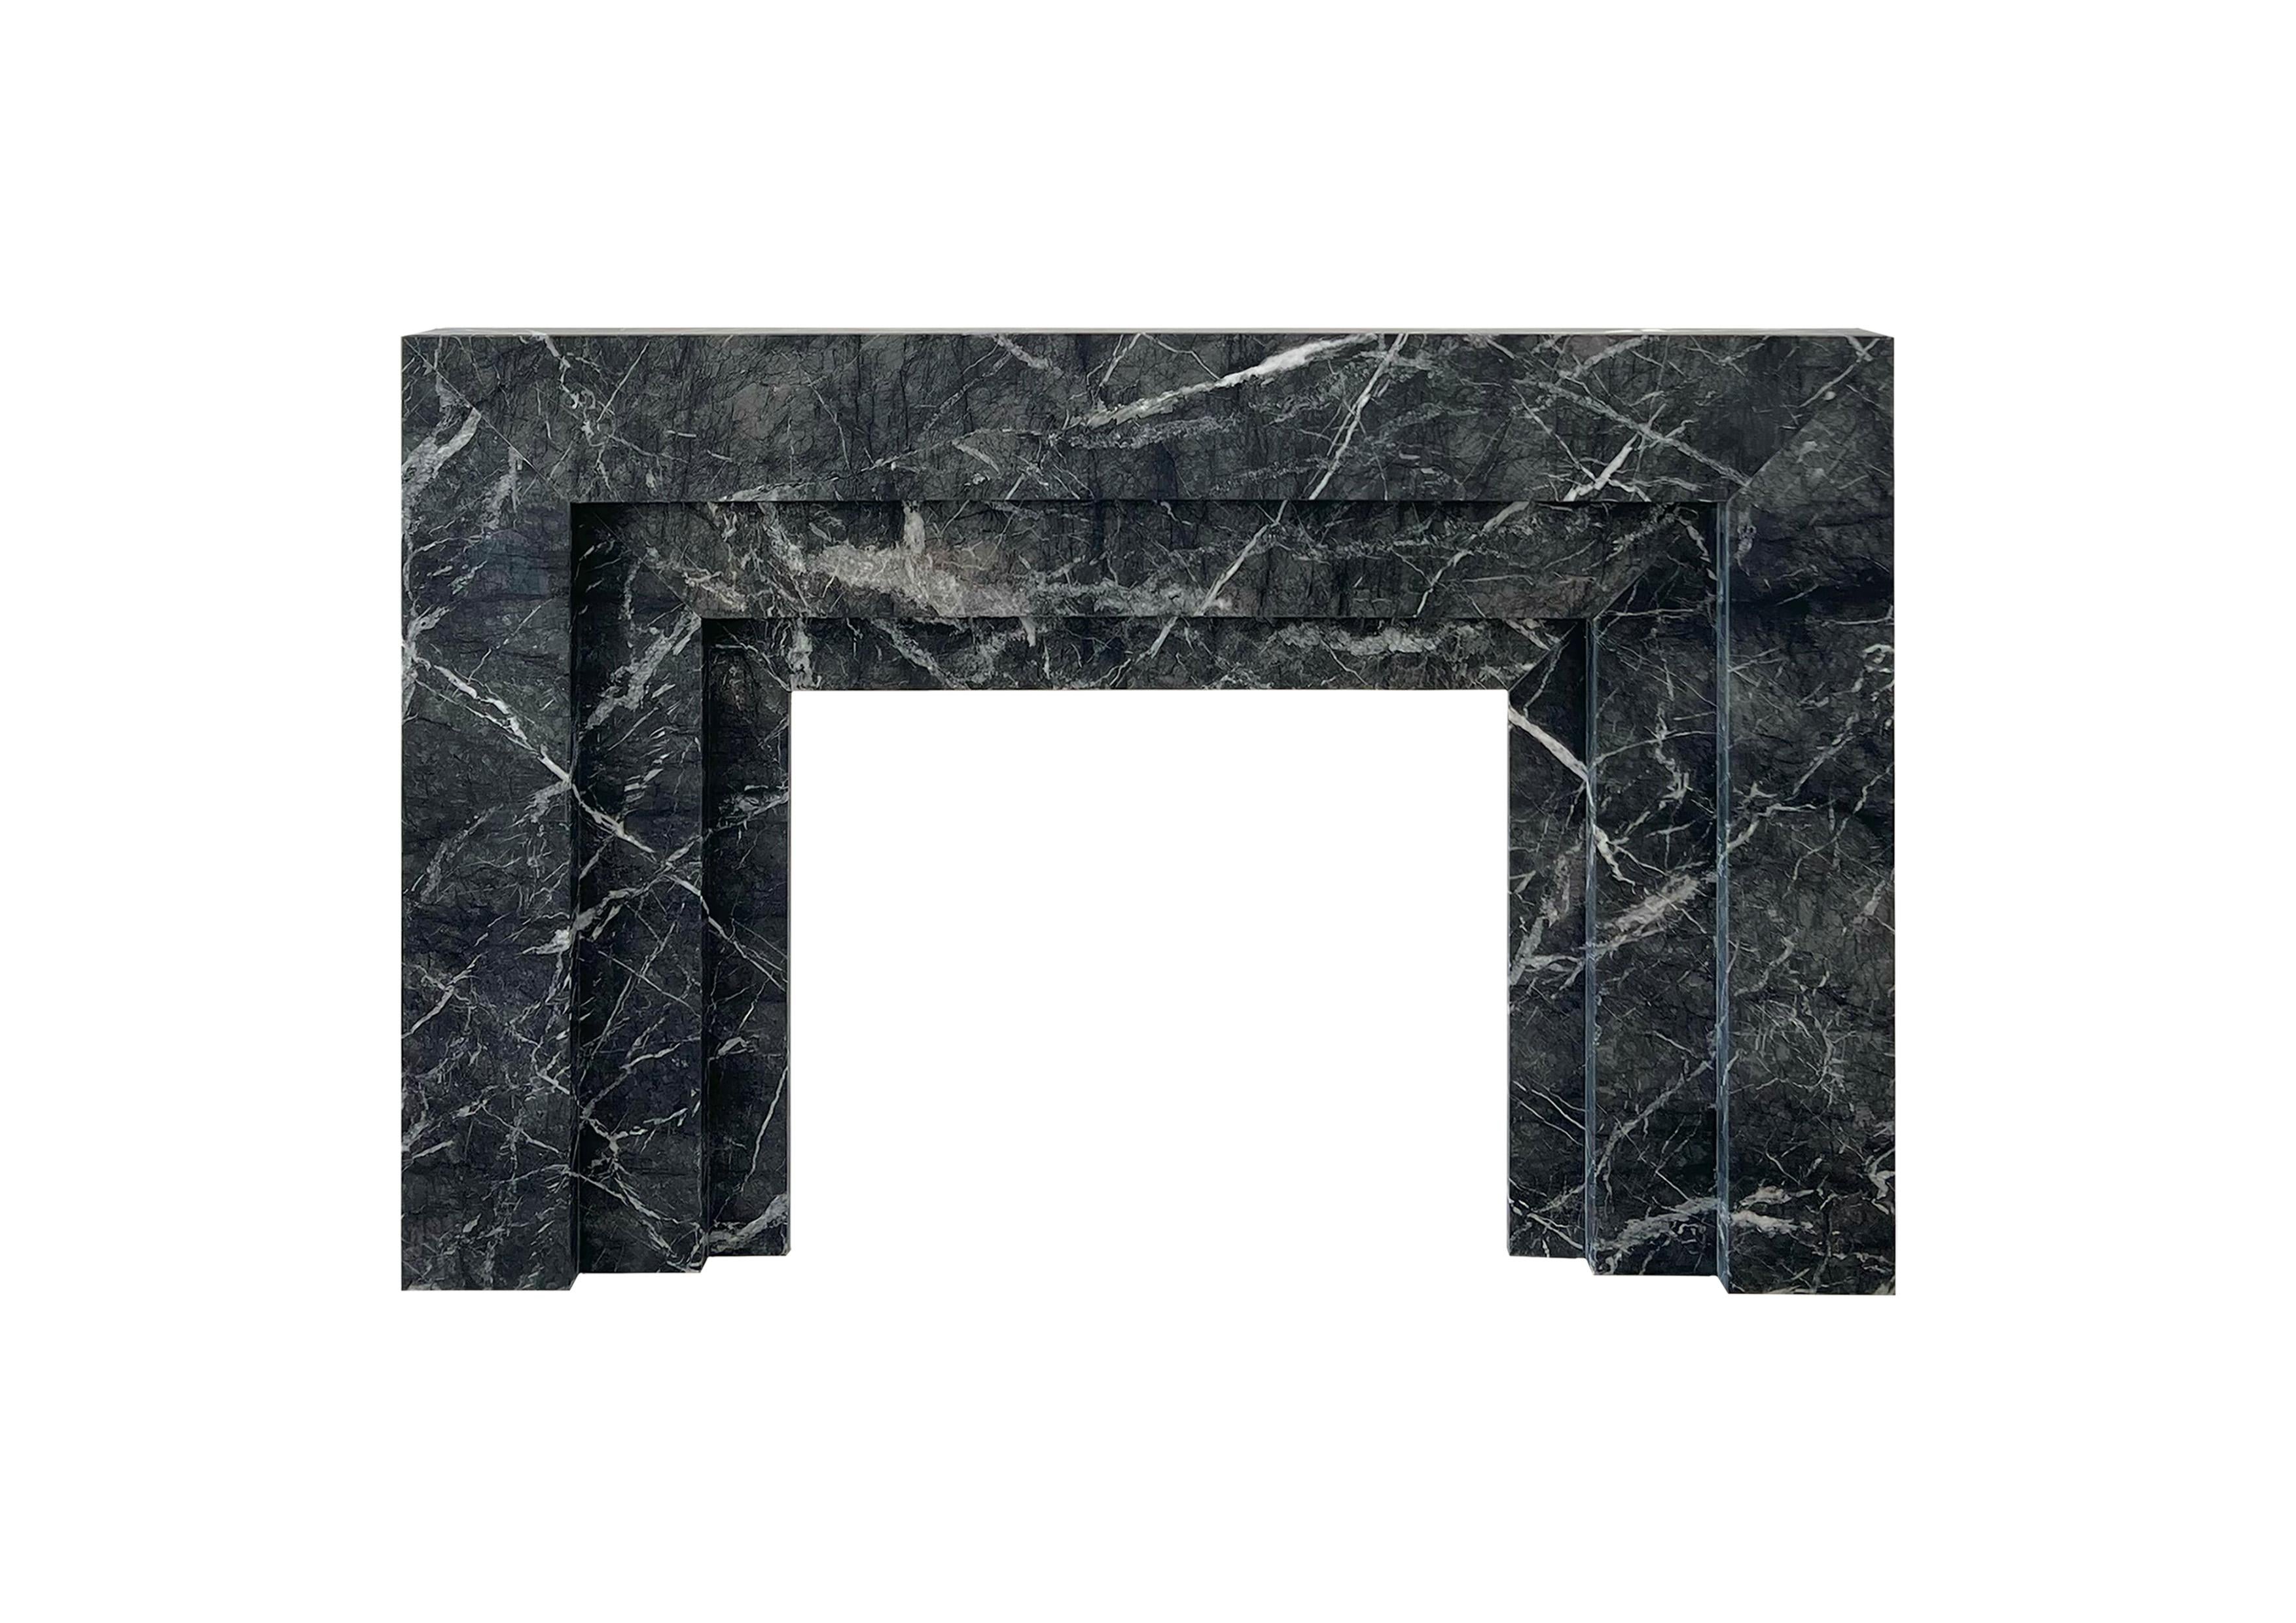 A custom made mantel produced in stunning Grigio Carnico marble by skilled craftsman in our Italian factory.

A contemporary take on an Art Deco inspired design has classic Parisian style and chic.

Bespoke sizing is available upon